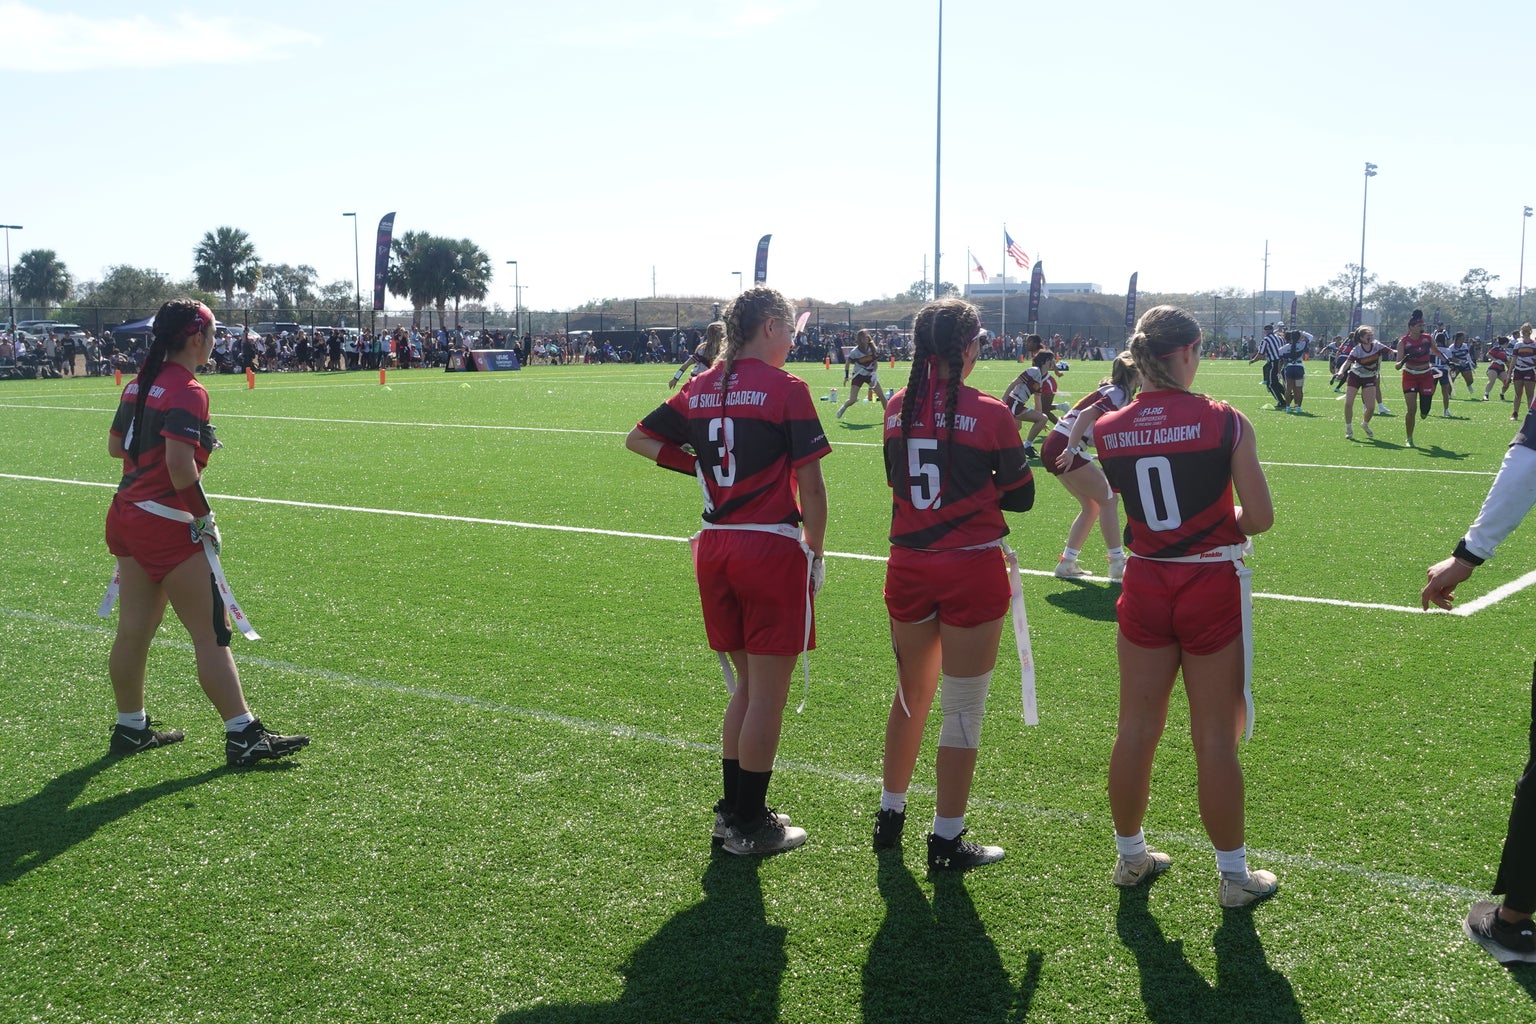 A photo of 4 female flag football players standing on the sideline there is one on the far left and then there are three standing near each other wearing the numbers 3, 5, and 10 all wearing red jerseys